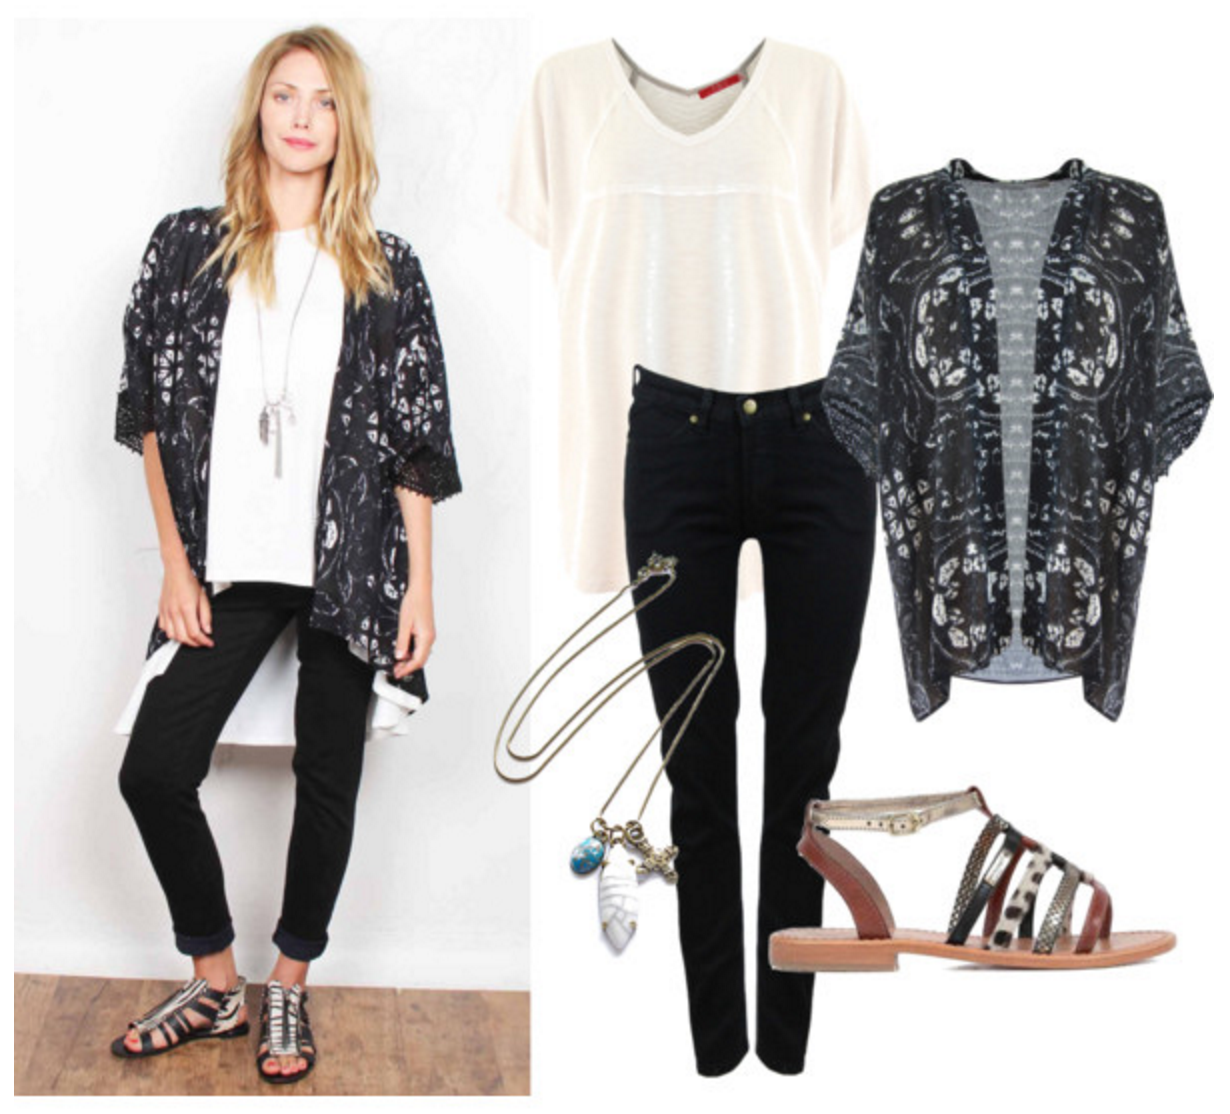 Get The Look: Casual Chic